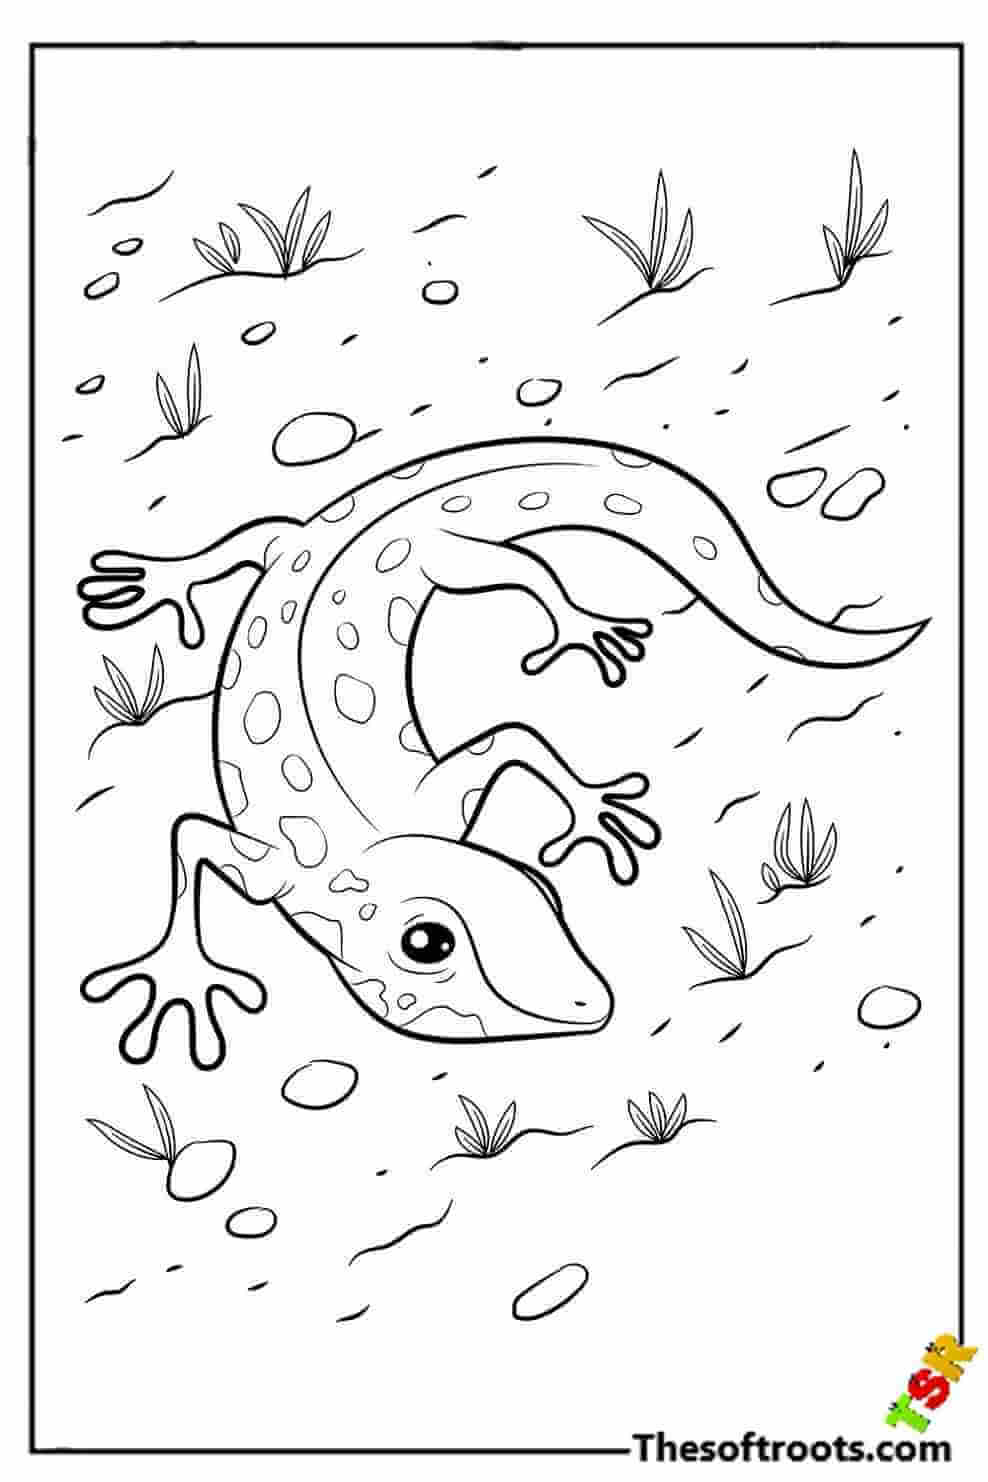 Lizard on a sunny day coloring pages